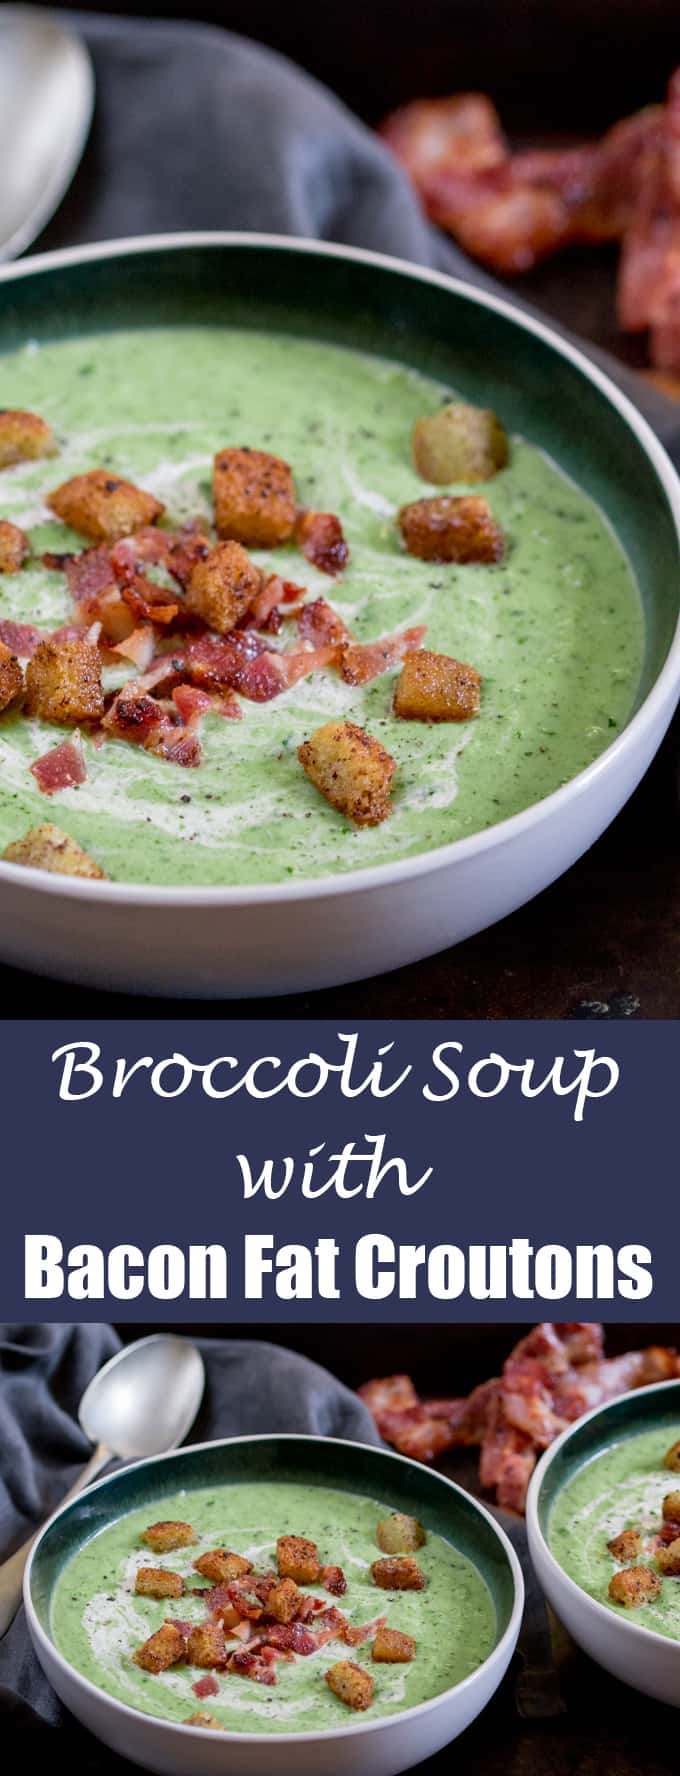 Broccoli Cheese Soup with Bacon Fried Bread Croutons - Speedy comfort food in a bowl!